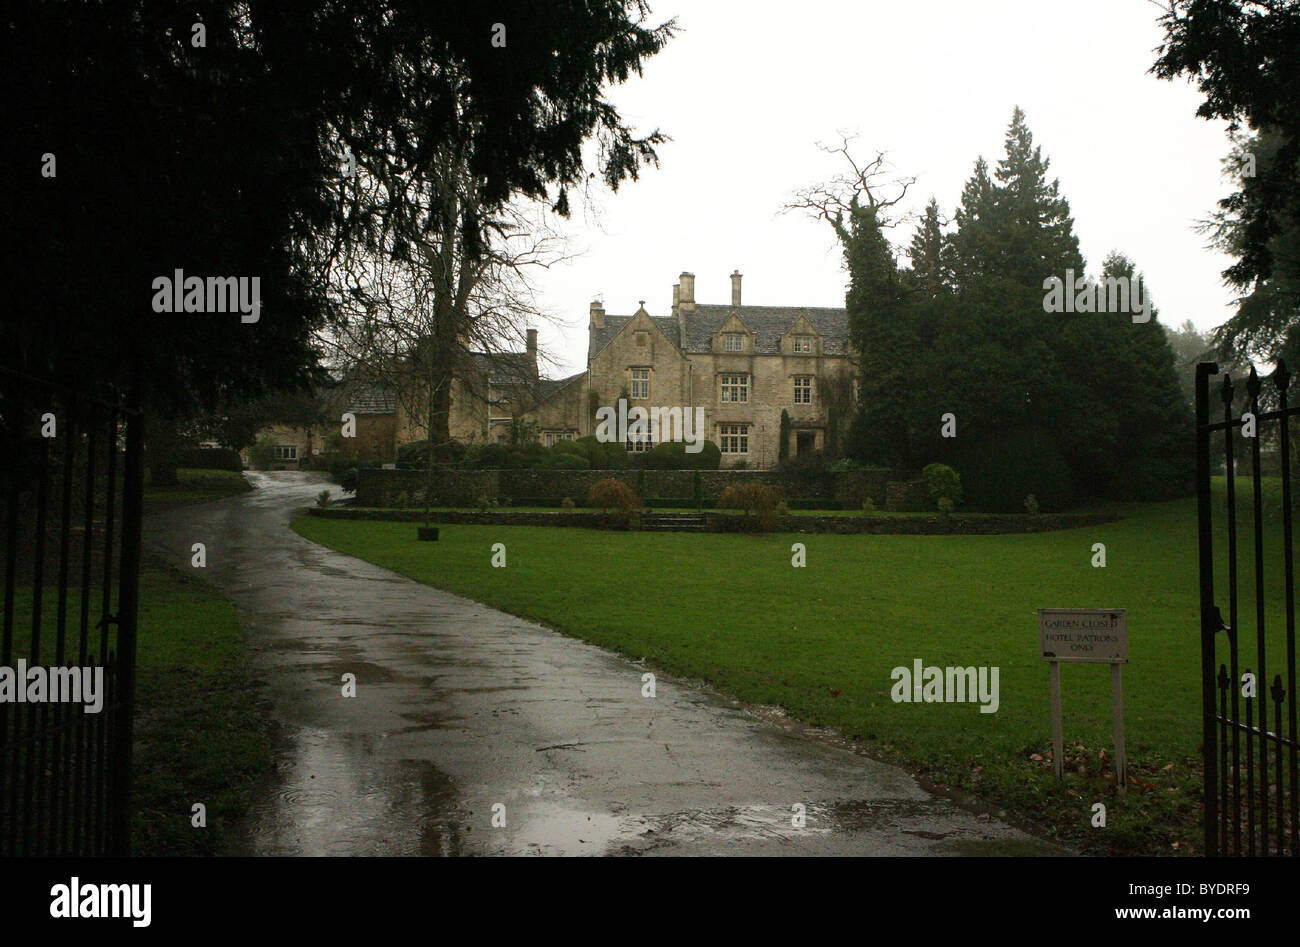 Barnsley House, the venue where Elizabeth Hurley and Arun Nayar are due to marry on 3rd March 2007 Cirencester, Stock Photo